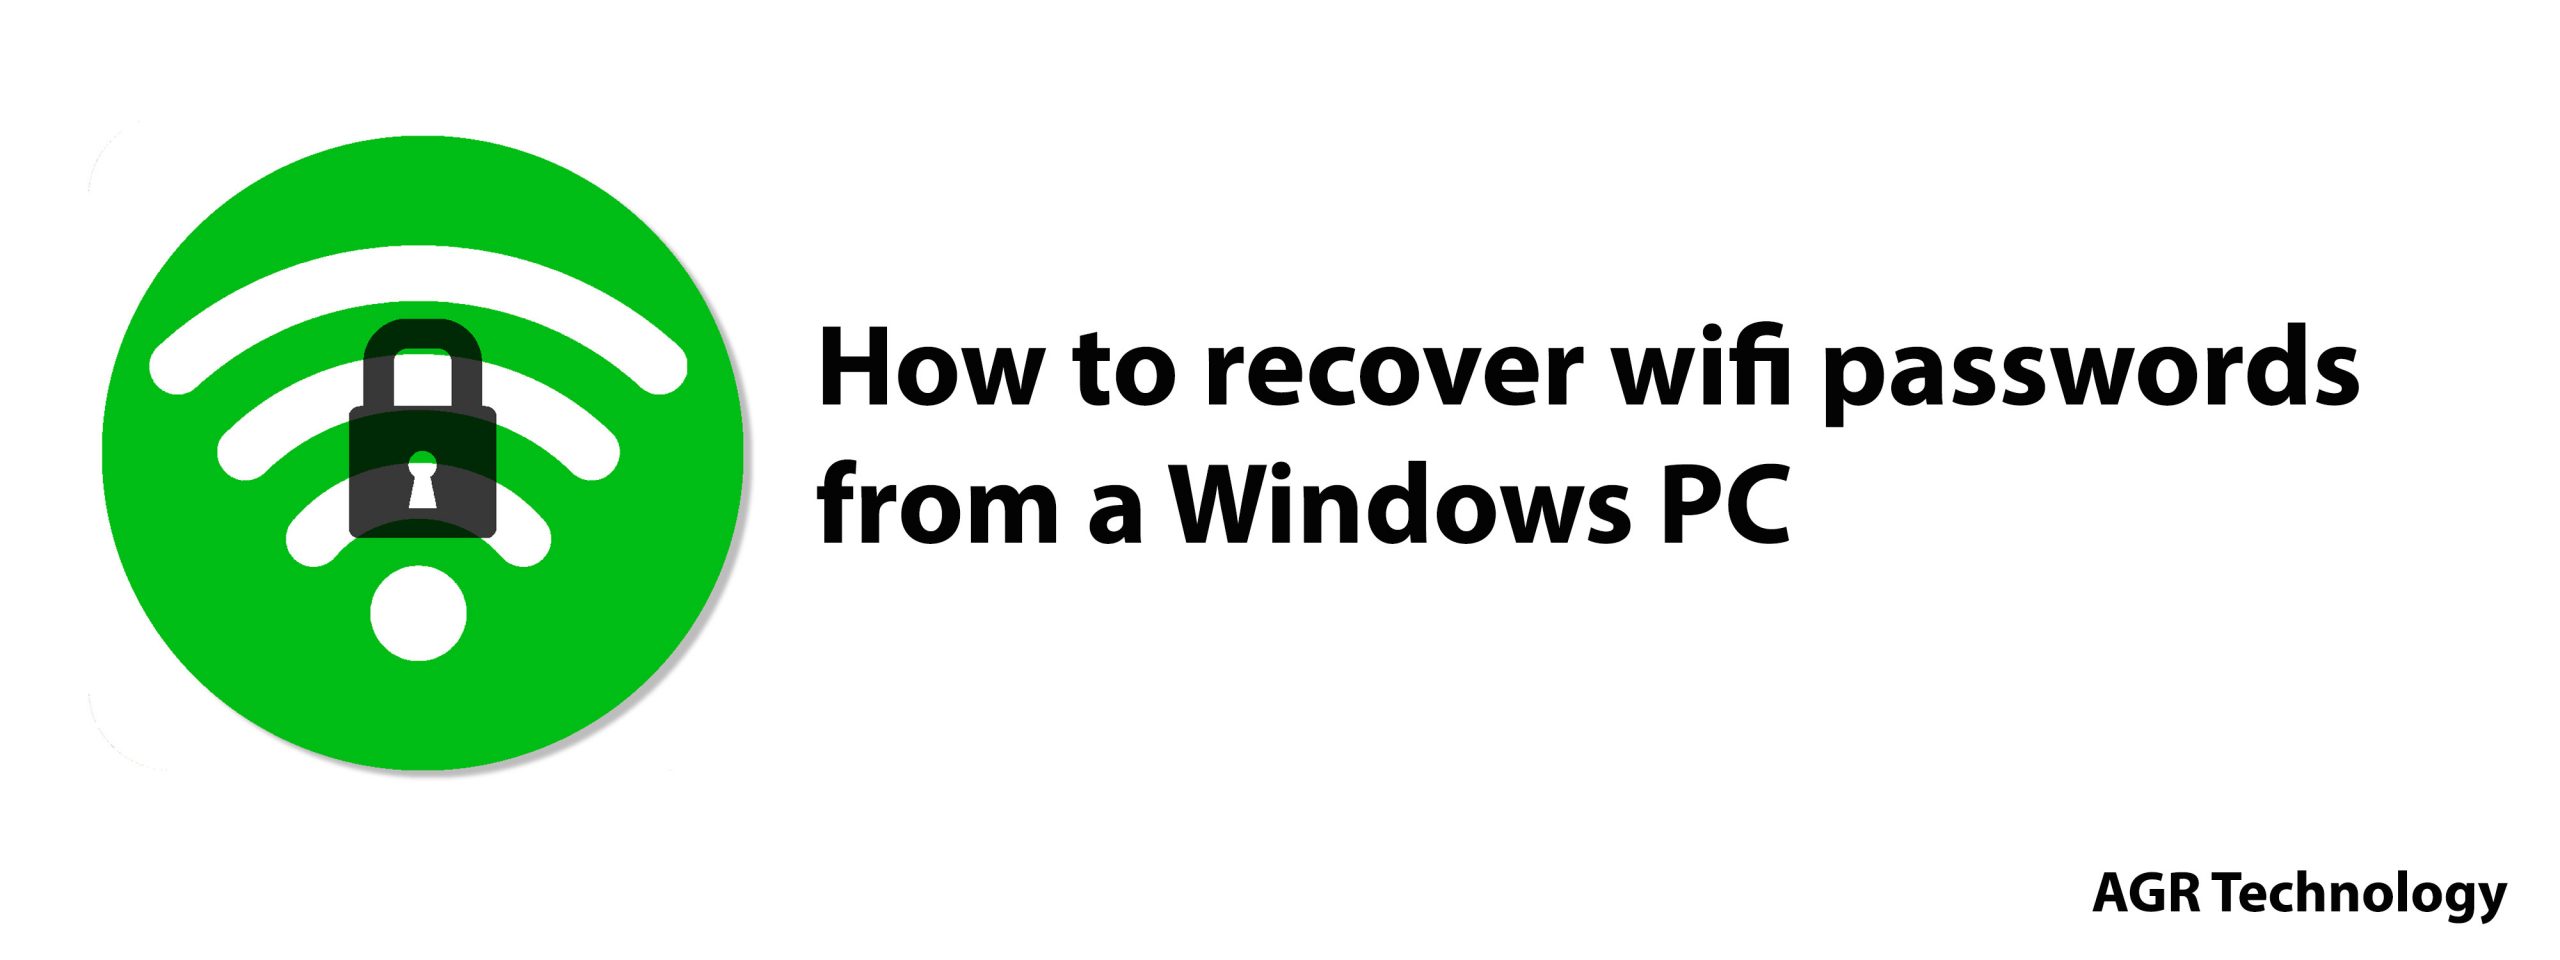 how-to-recover-wifi-passwords-windows-pc